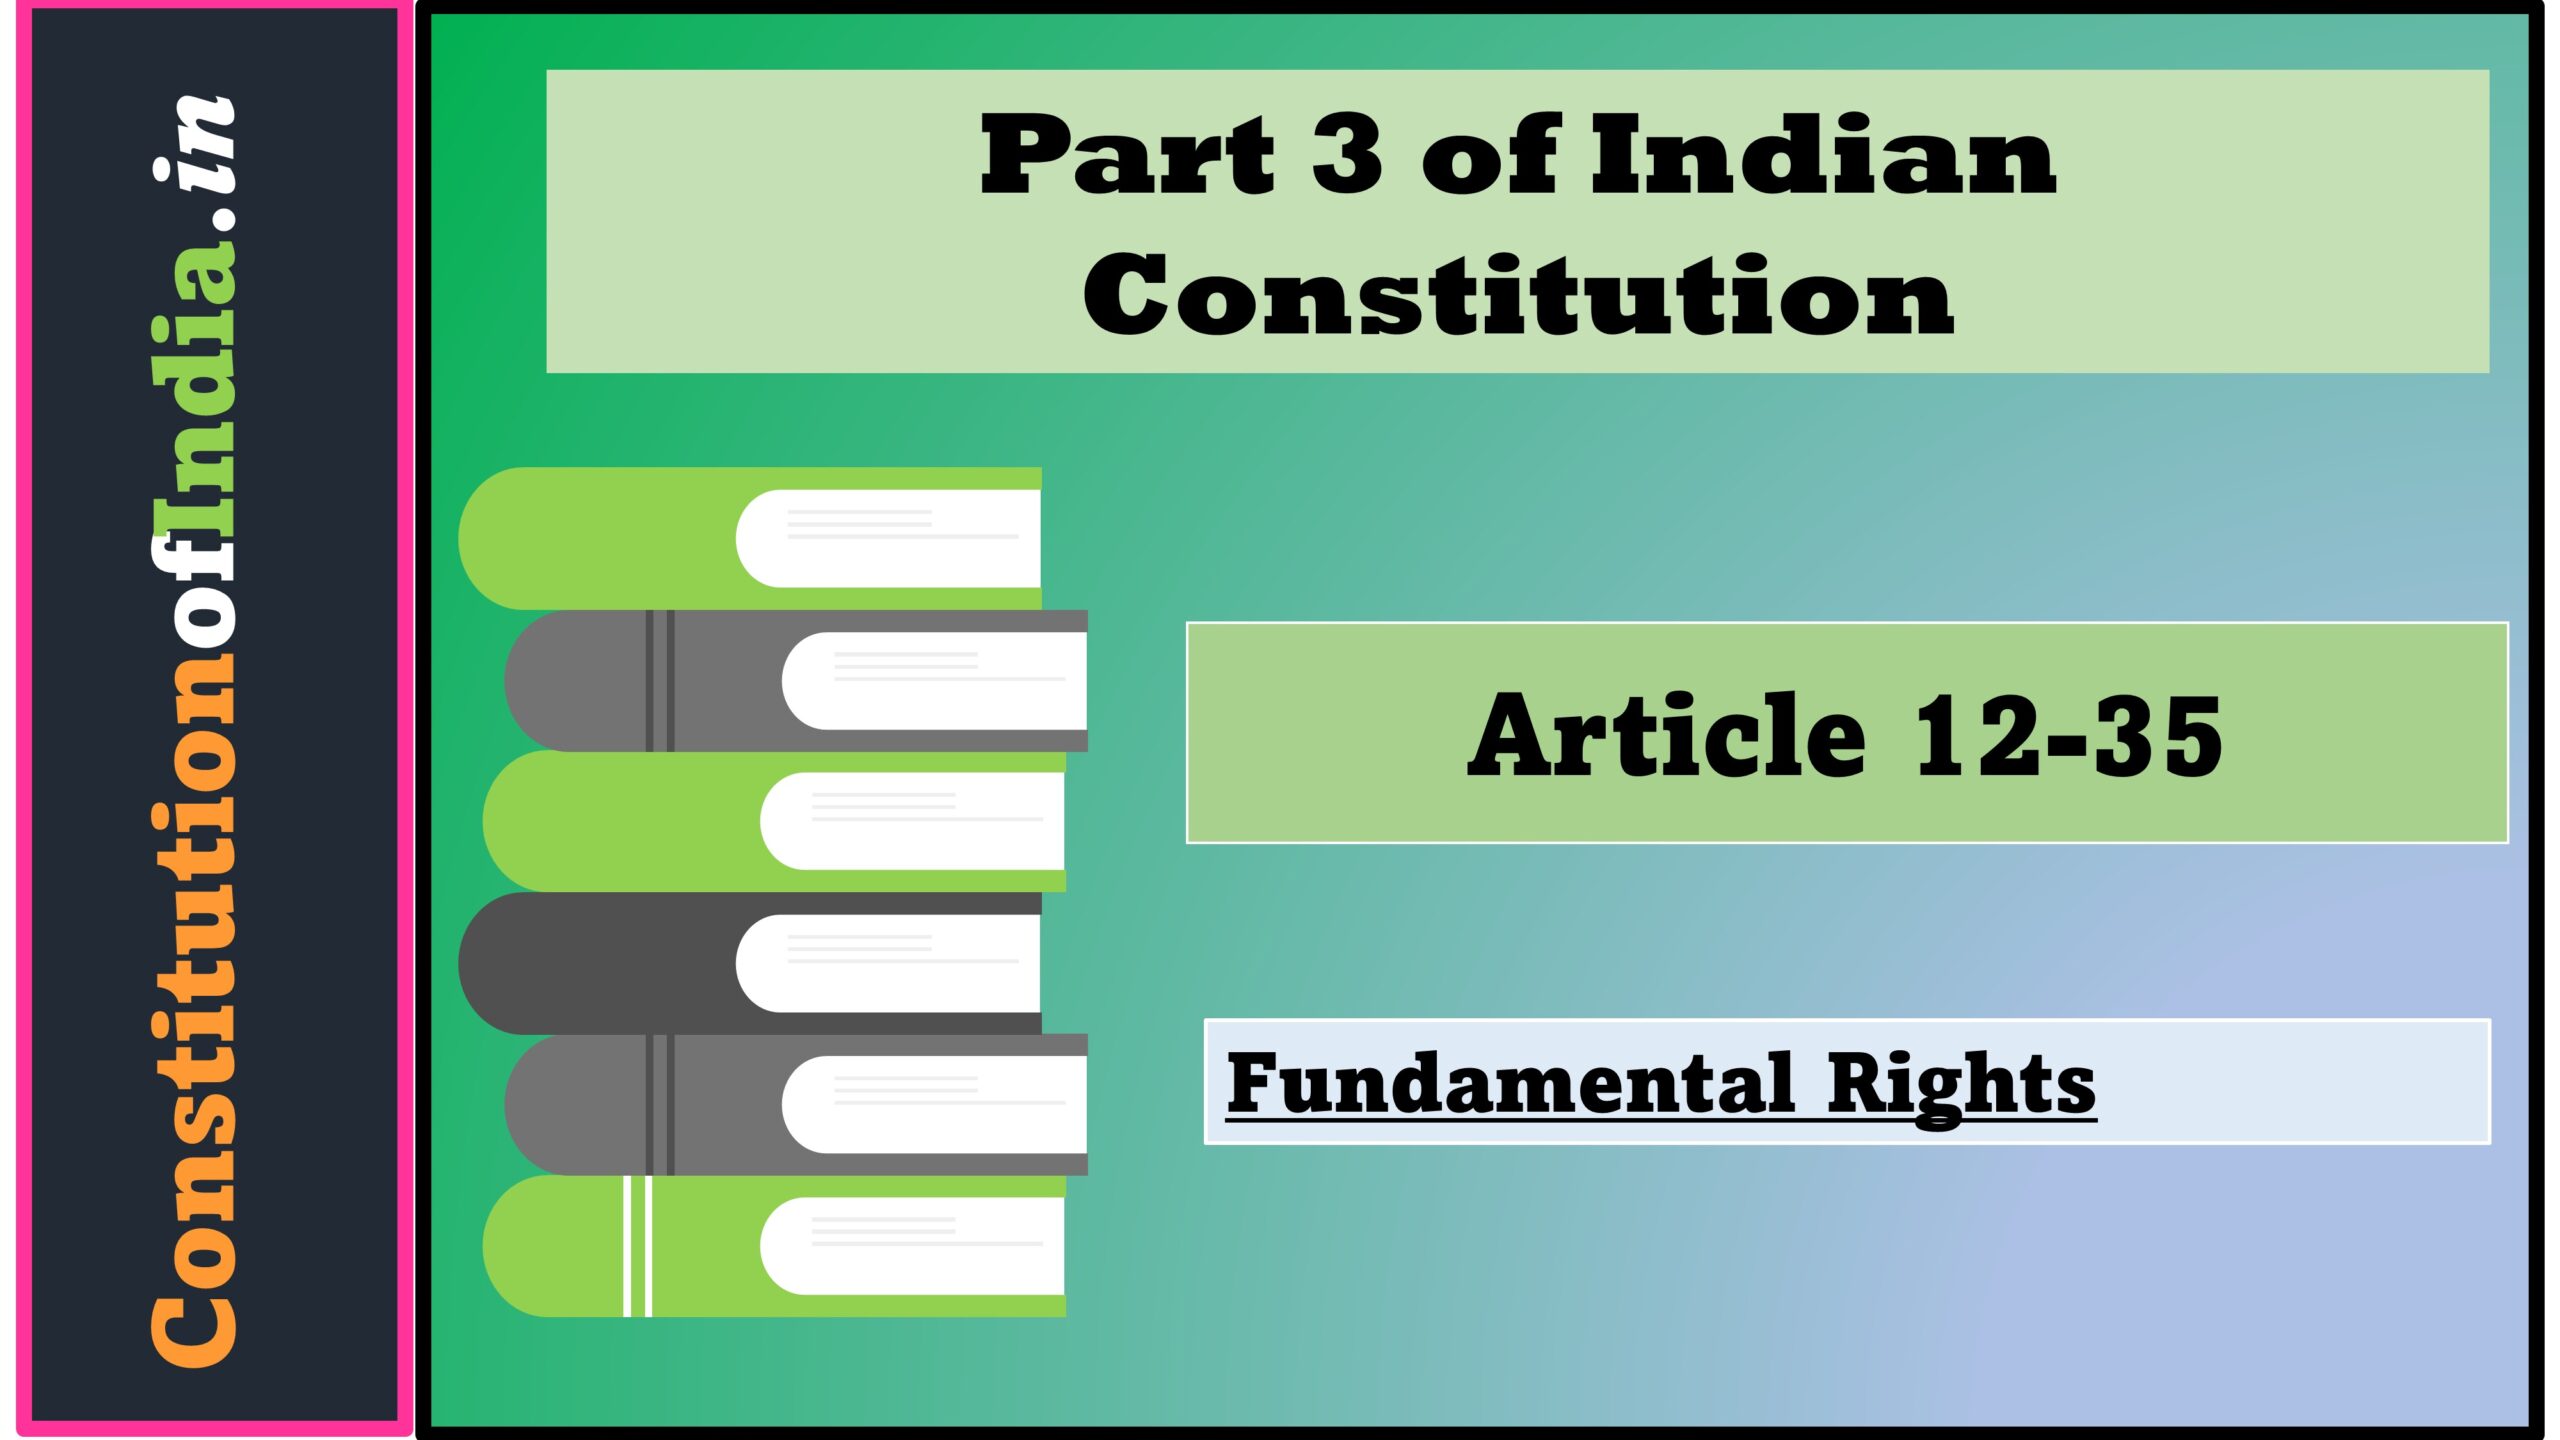 Part 3 of Indian Constitution